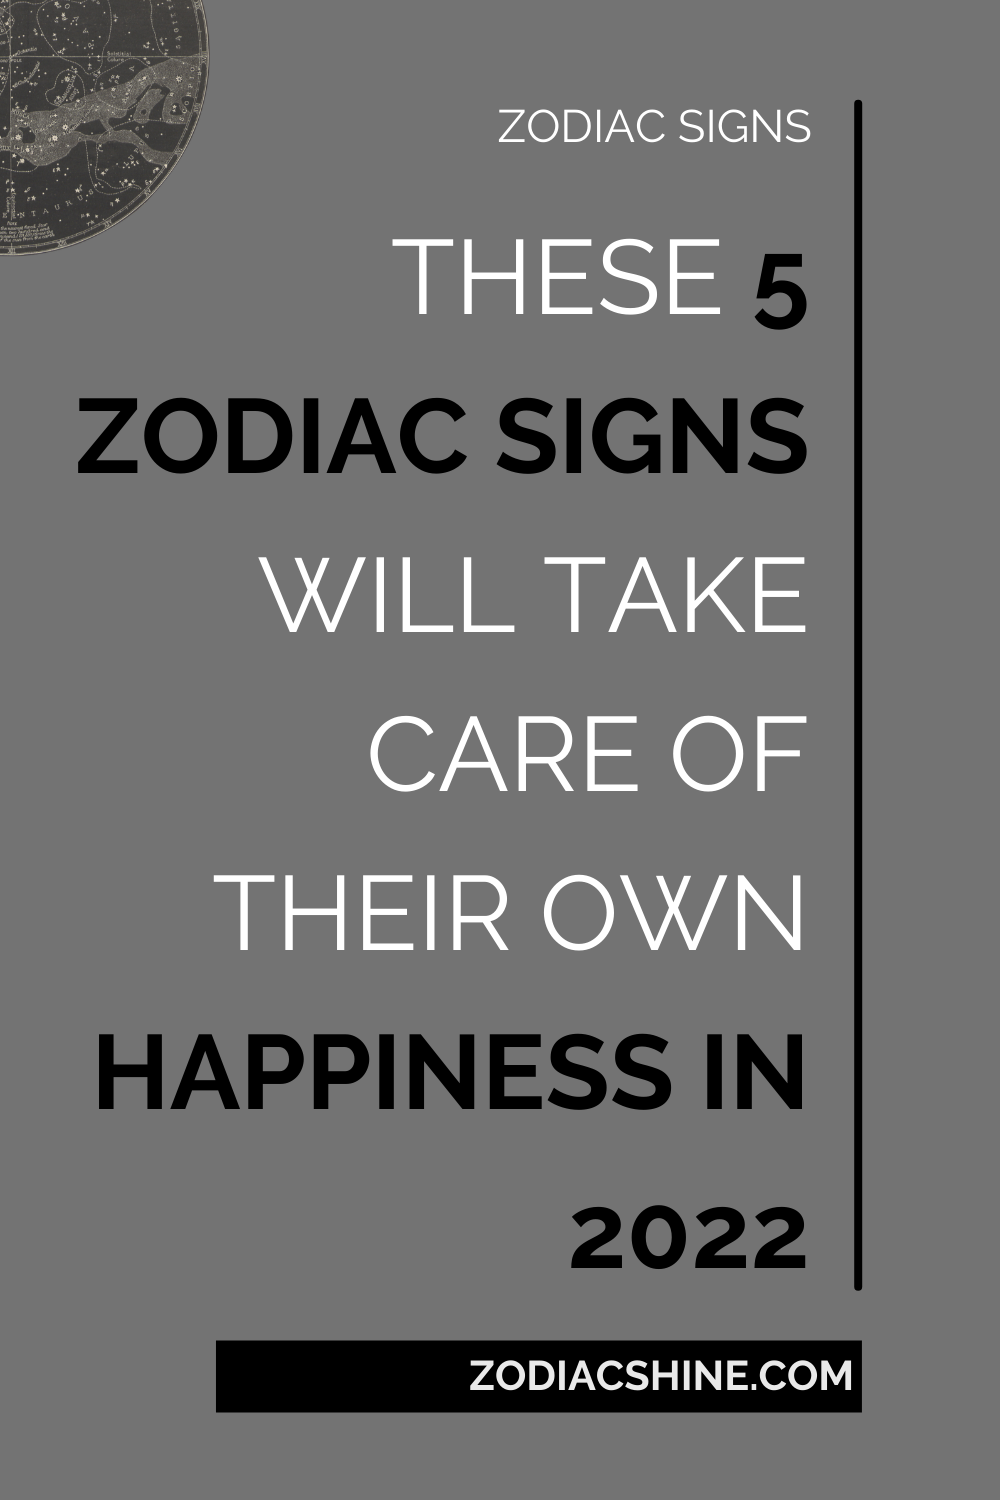 These 5 Zodiac Signs Will Take Care Of Their Own Happiness In 2022